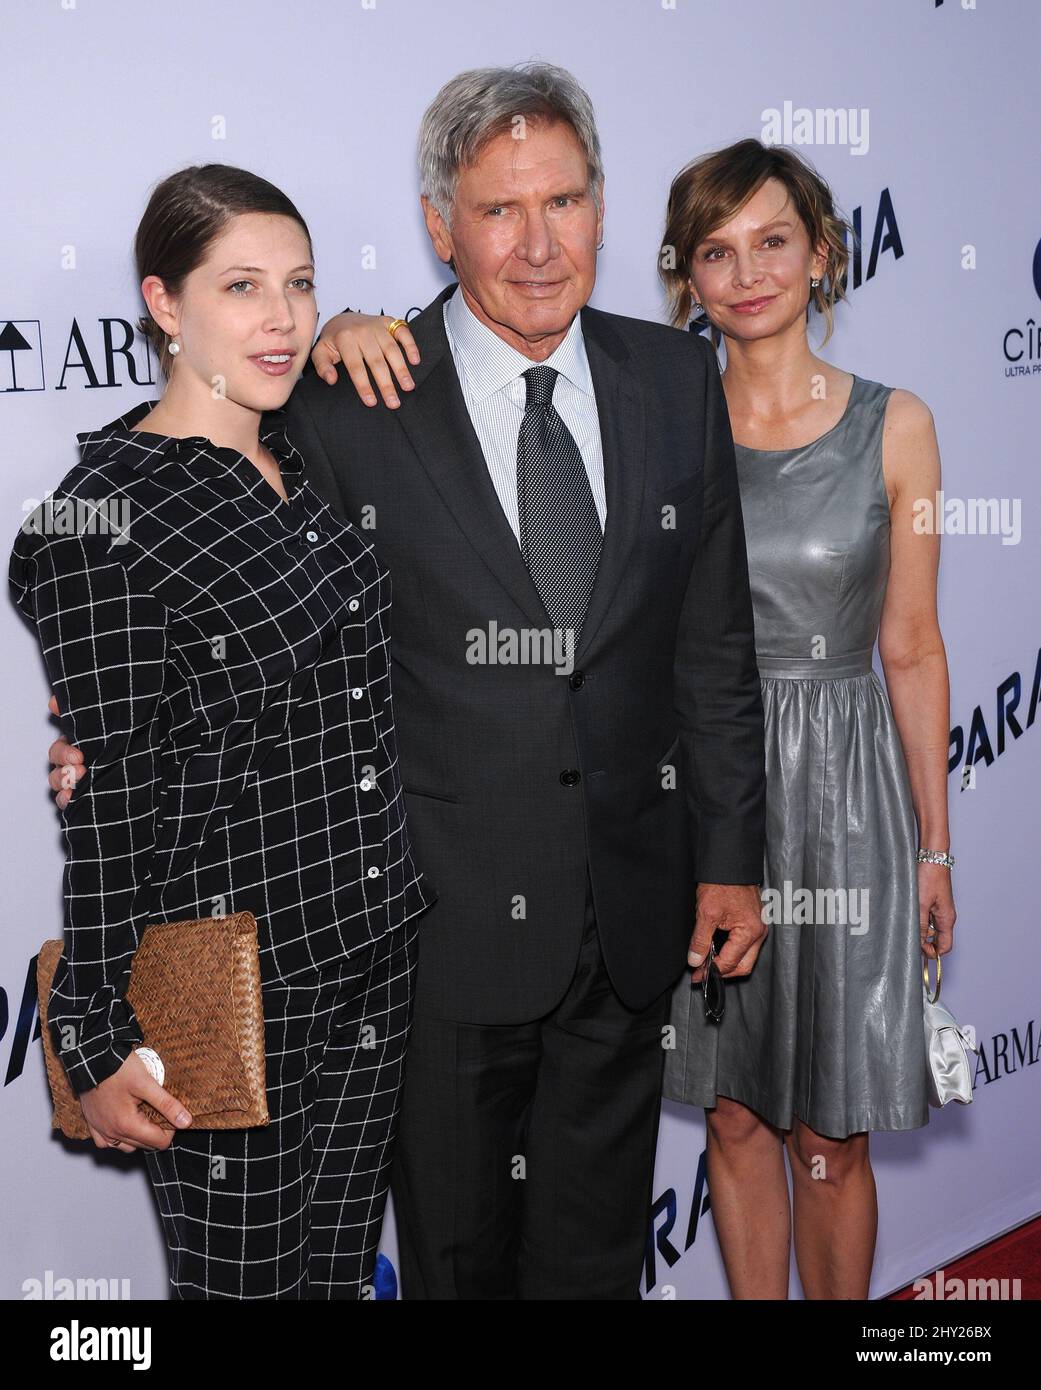 Georgia Ford, Harrison Ford & Calista Flockhart attends the 'Paranoia' US premiere held at the Directors Guild of America, Los Angeles. Stock Photo